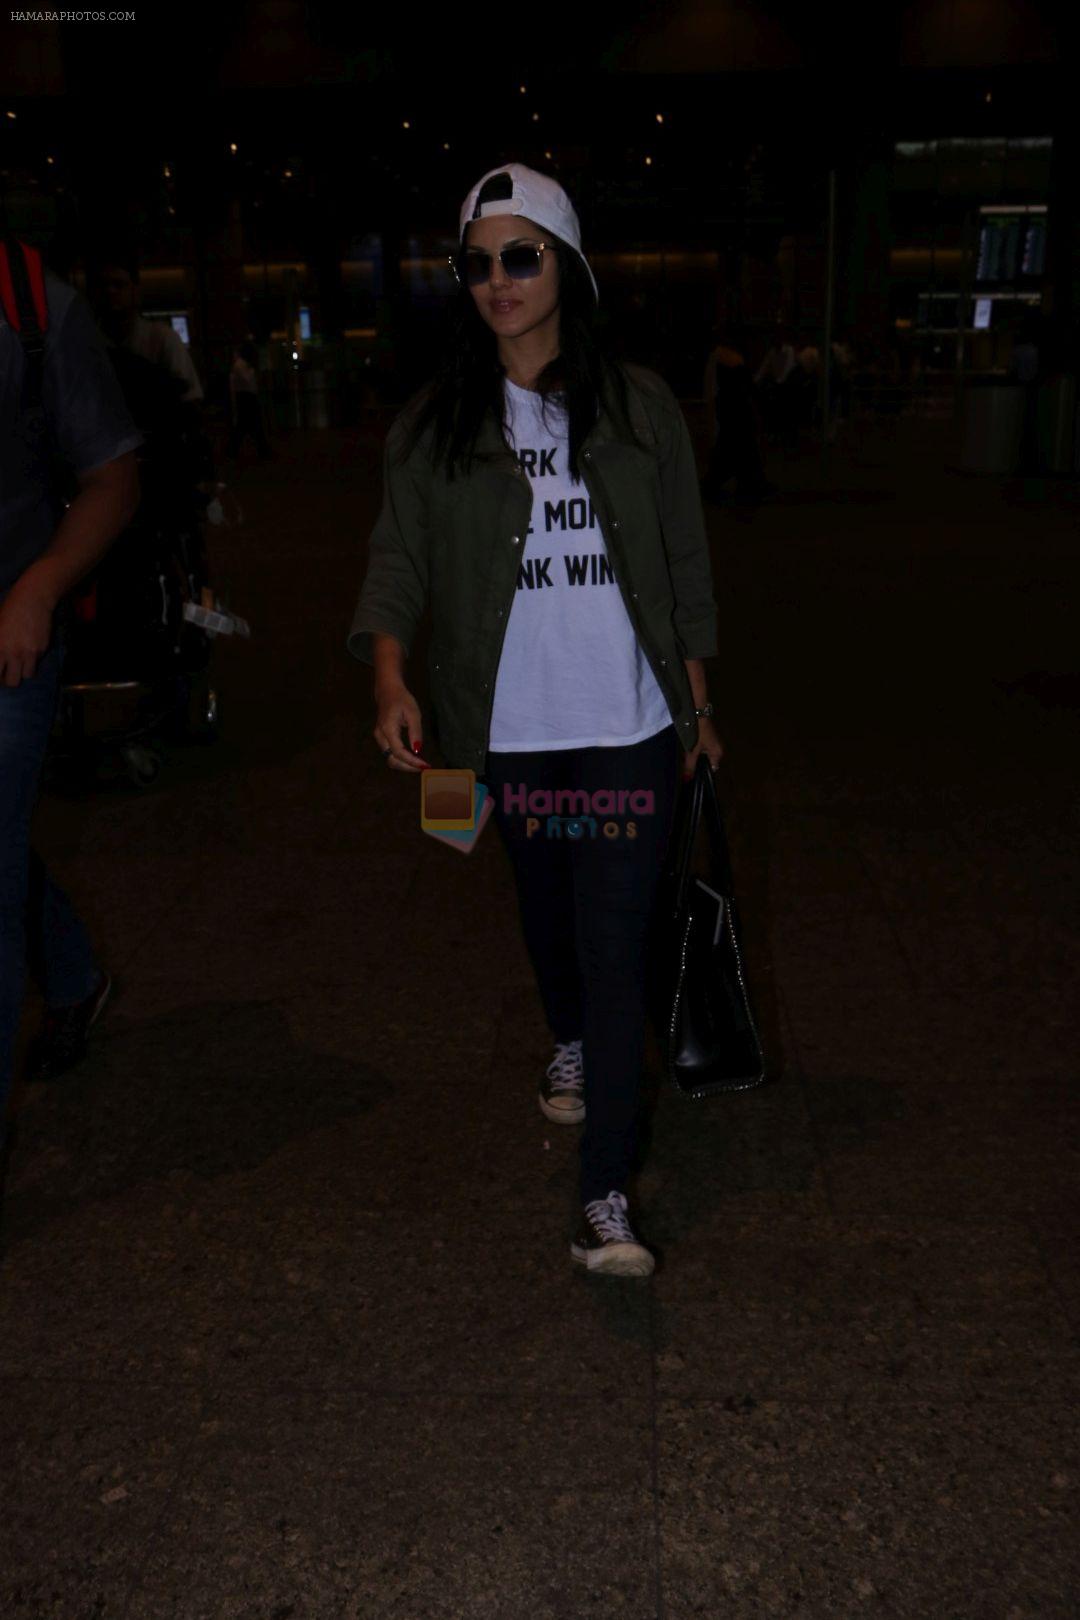 Sunny Leone Spotted At Airport on 29th June 2017